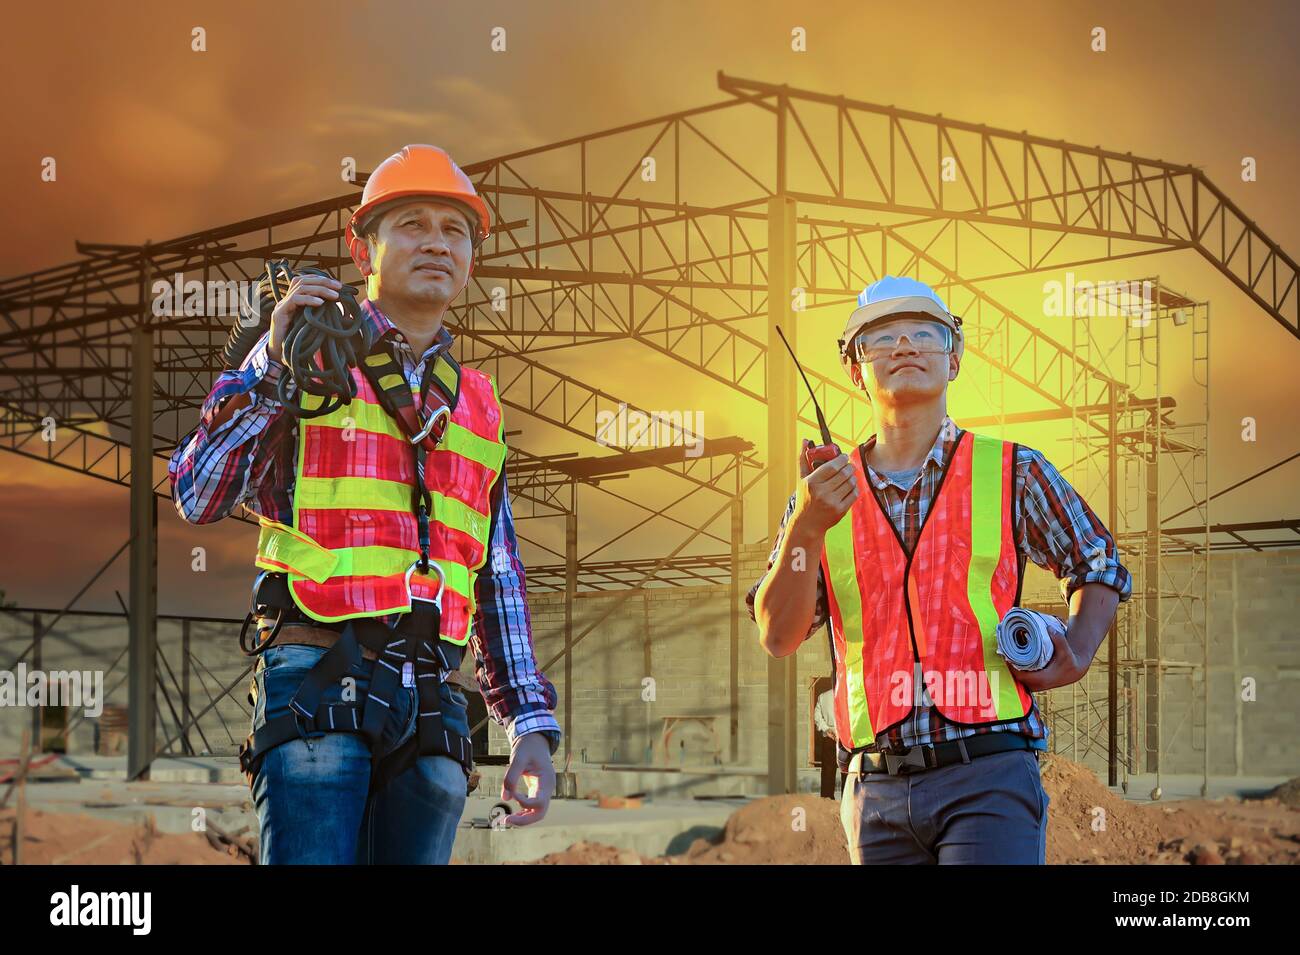 Two engineers on a construction site, Thailand Stock Photo